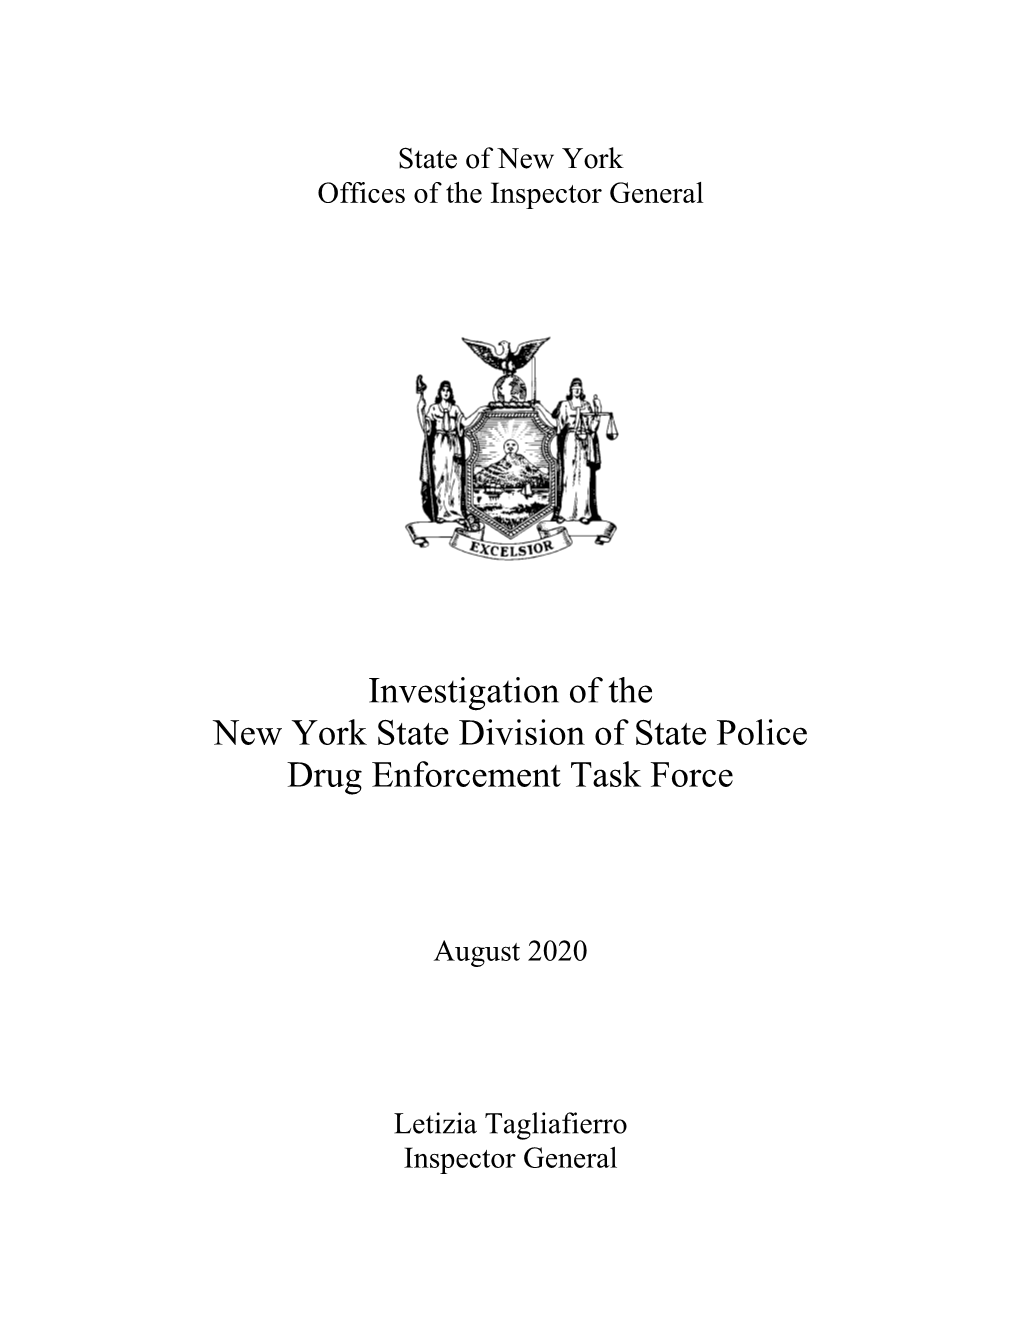 Investigation of the New York State Division of State Police Drug Enforcement Task Force